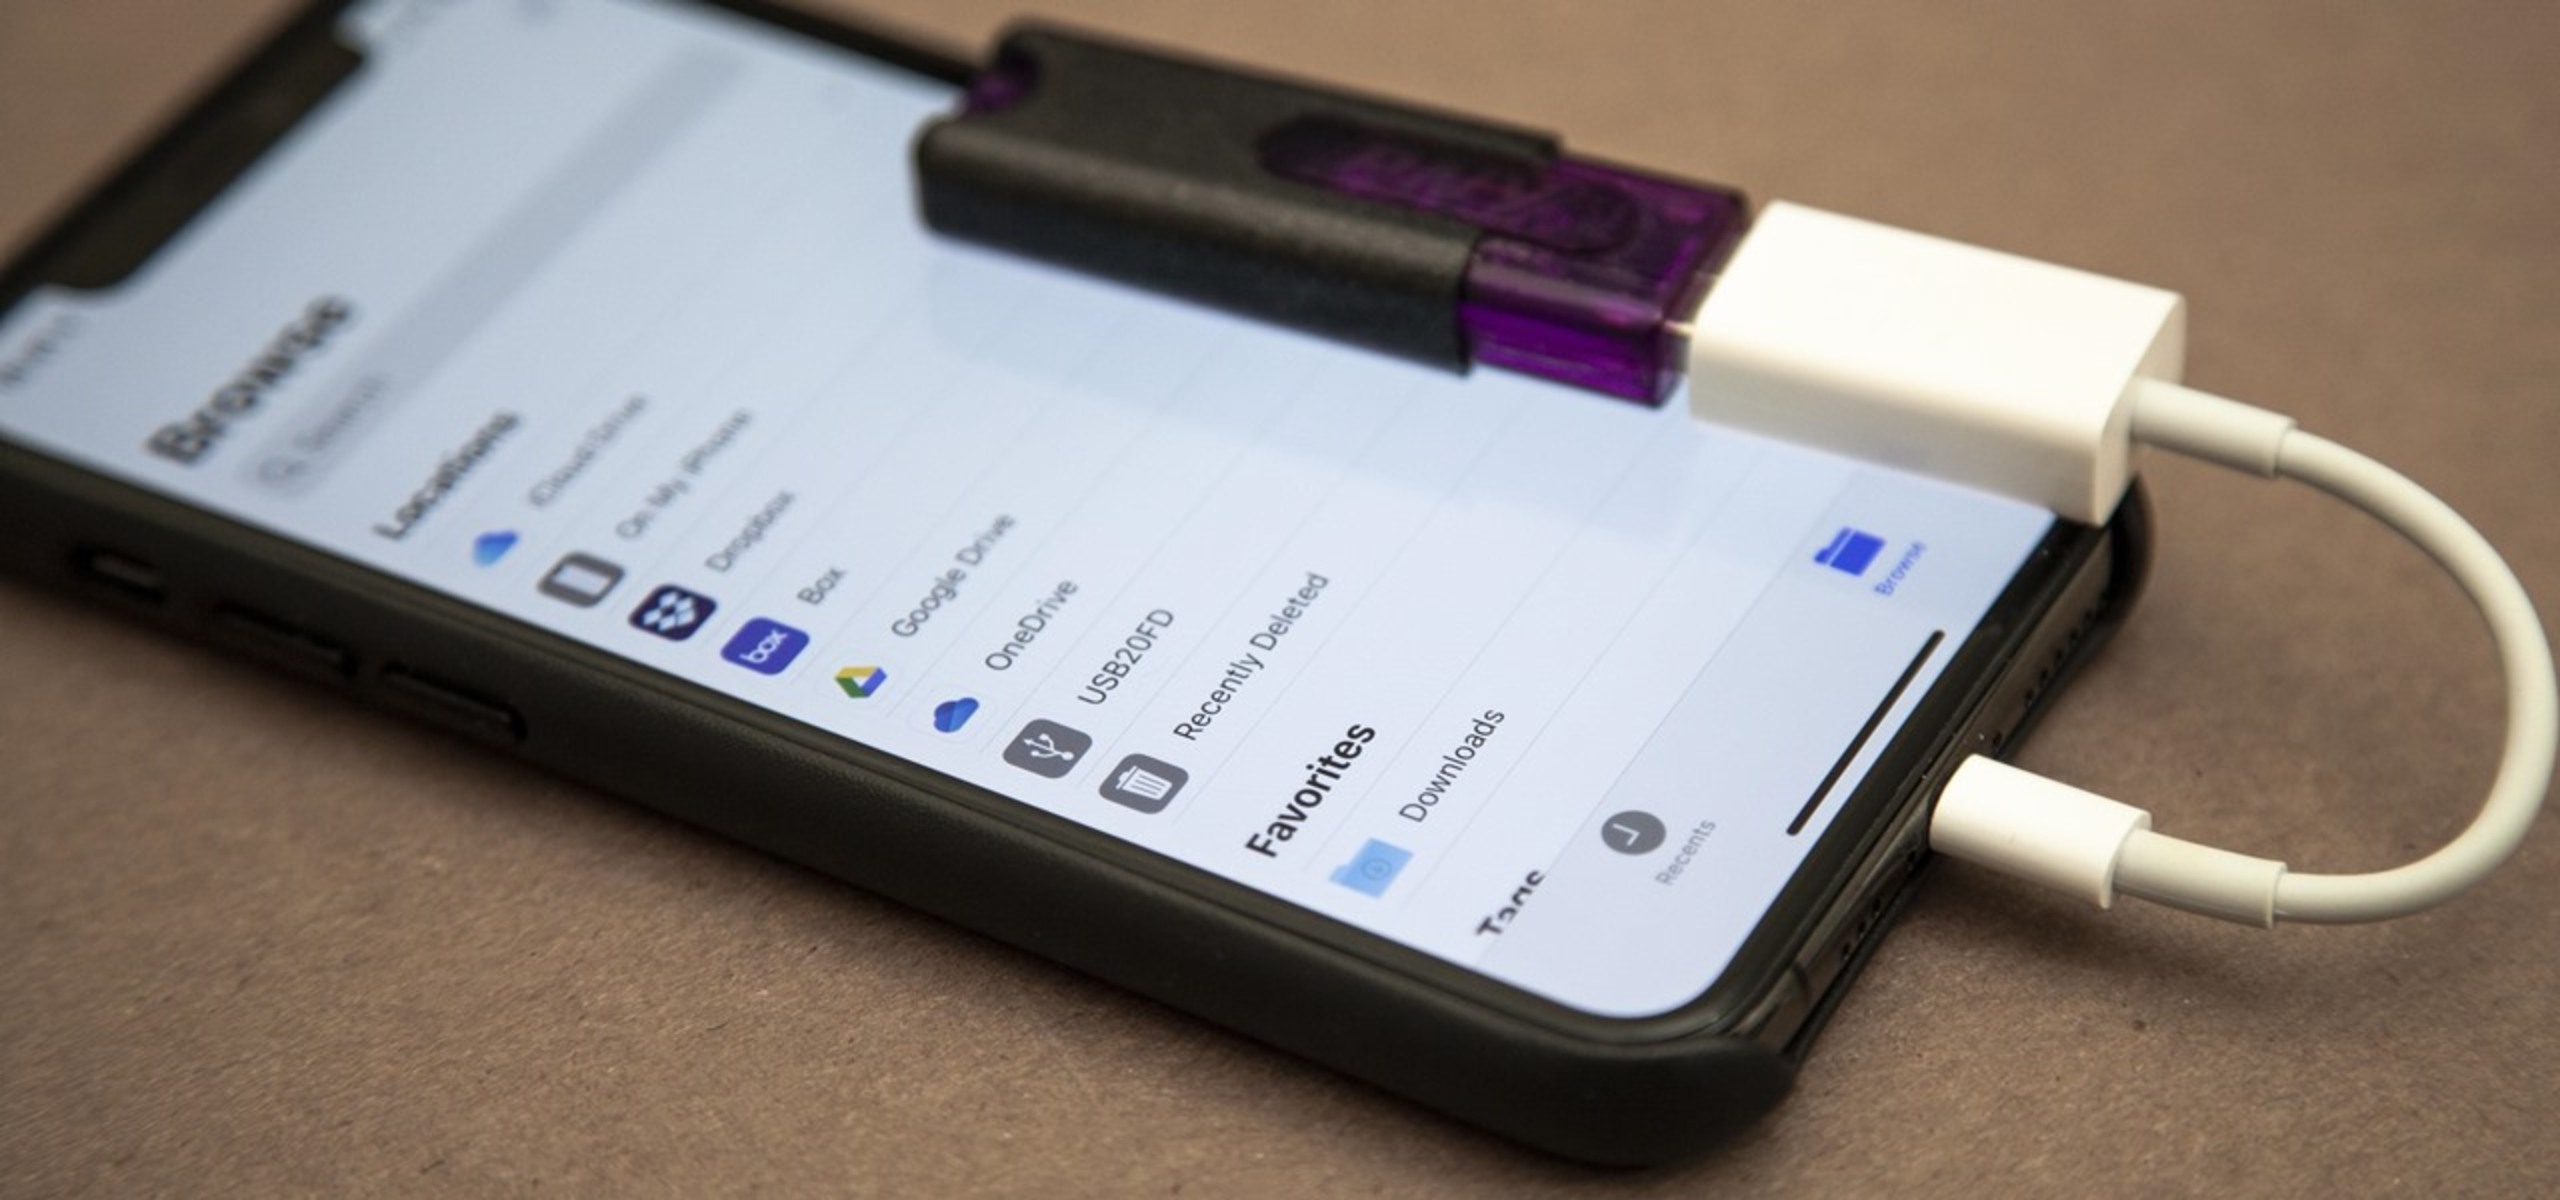 external-storage-connecting-a-flash-drive-to-iphone-10